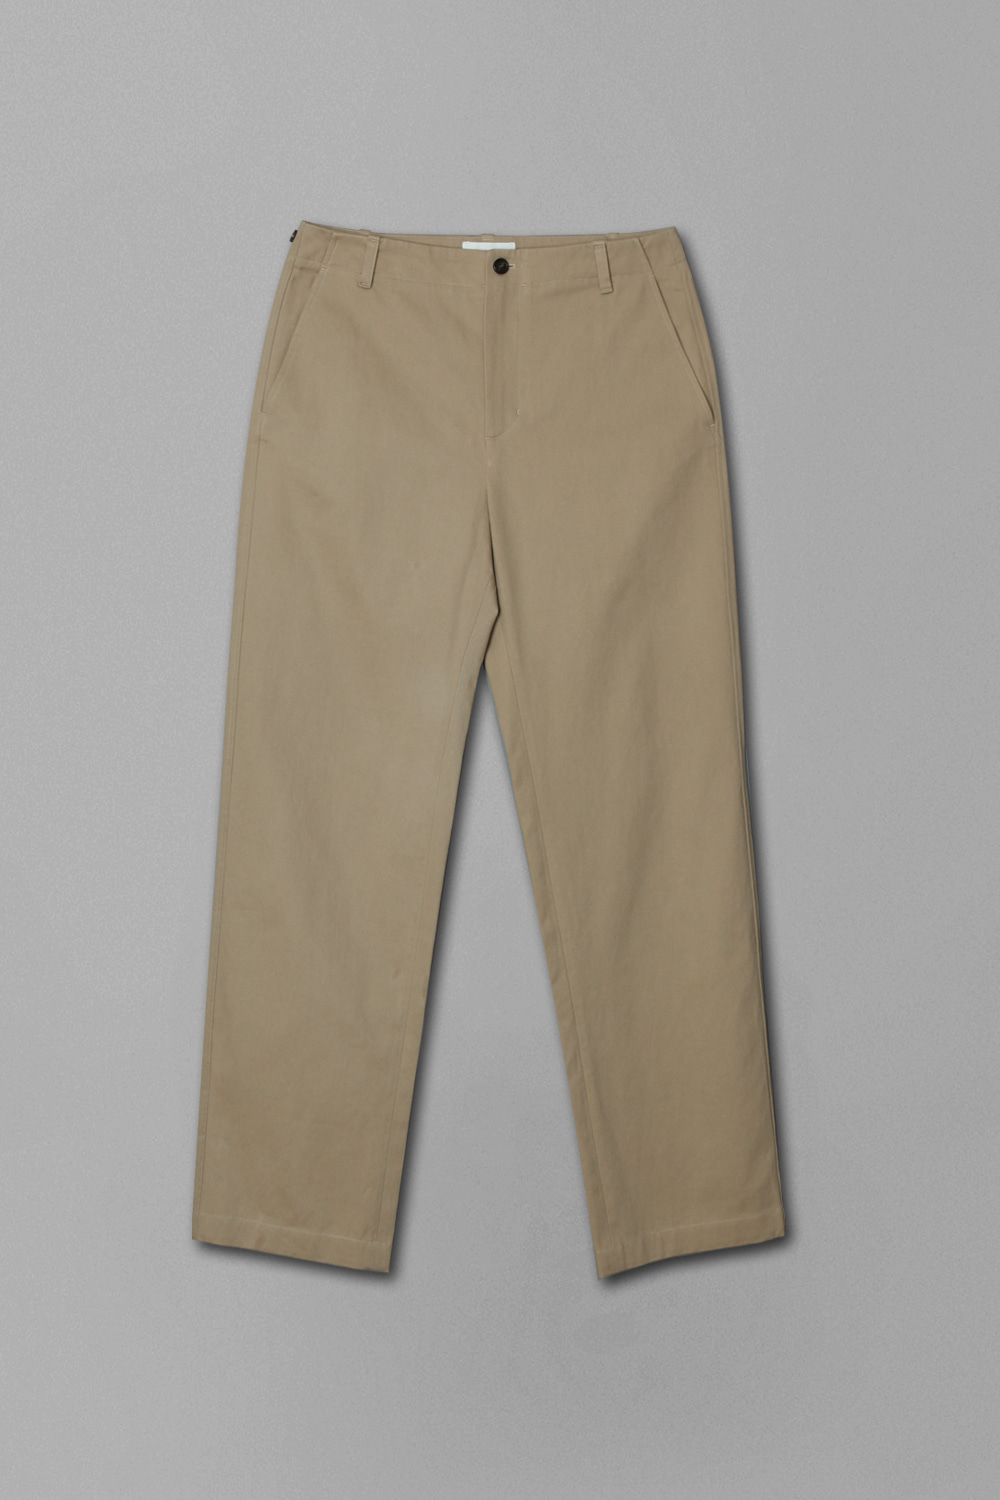 COTTON RELAXED CHINO PANTS - BEIGE